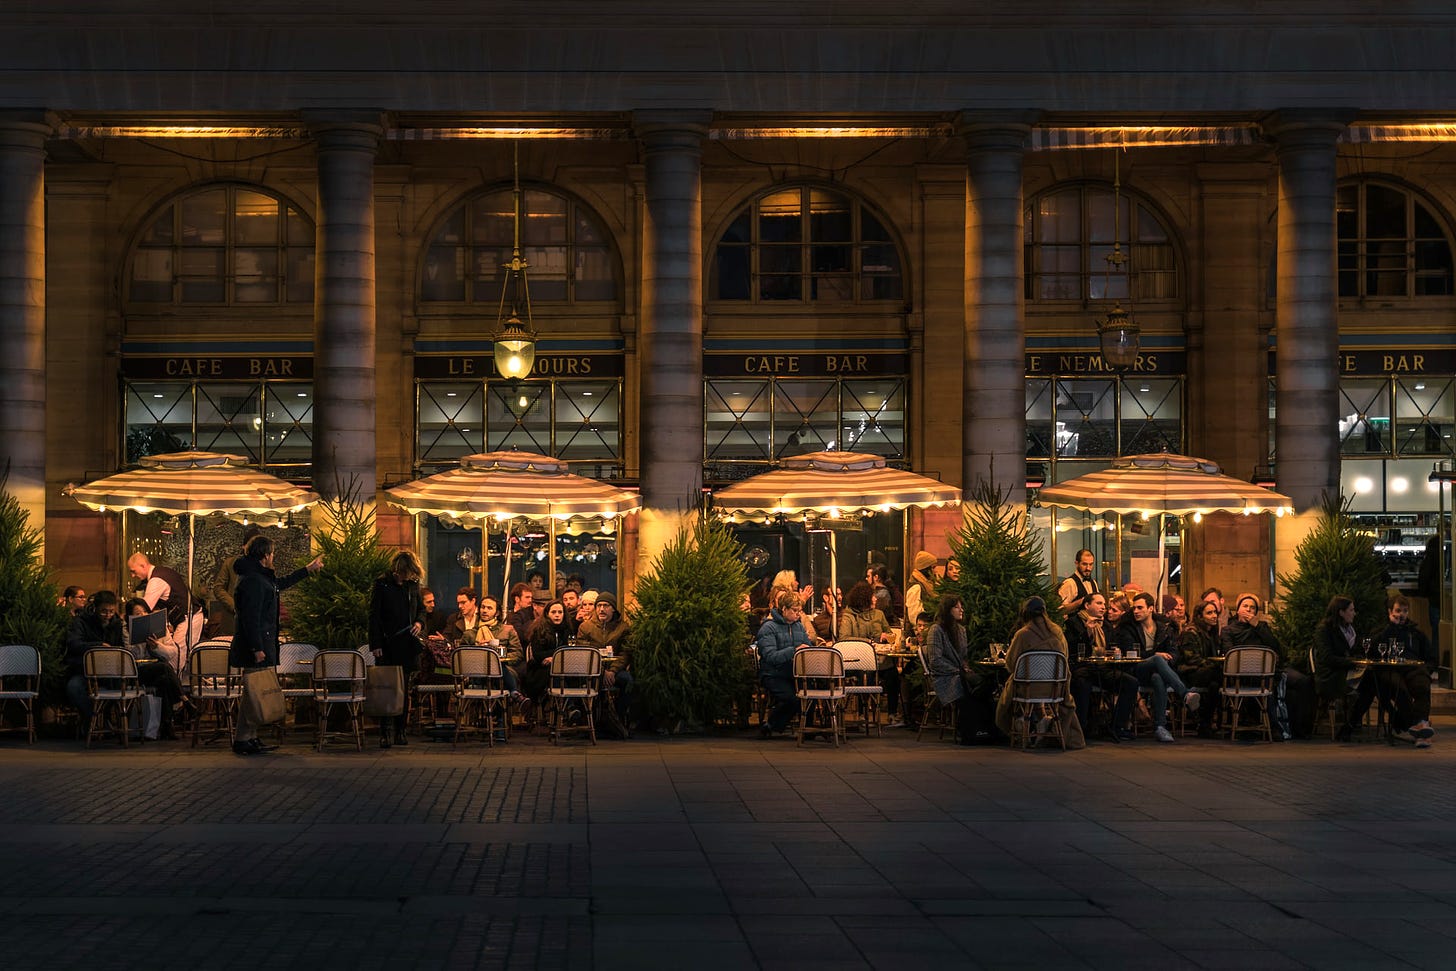 A photo of a Parisian street cafe at night. Many people are seated outside, under illuminated umbrellas.